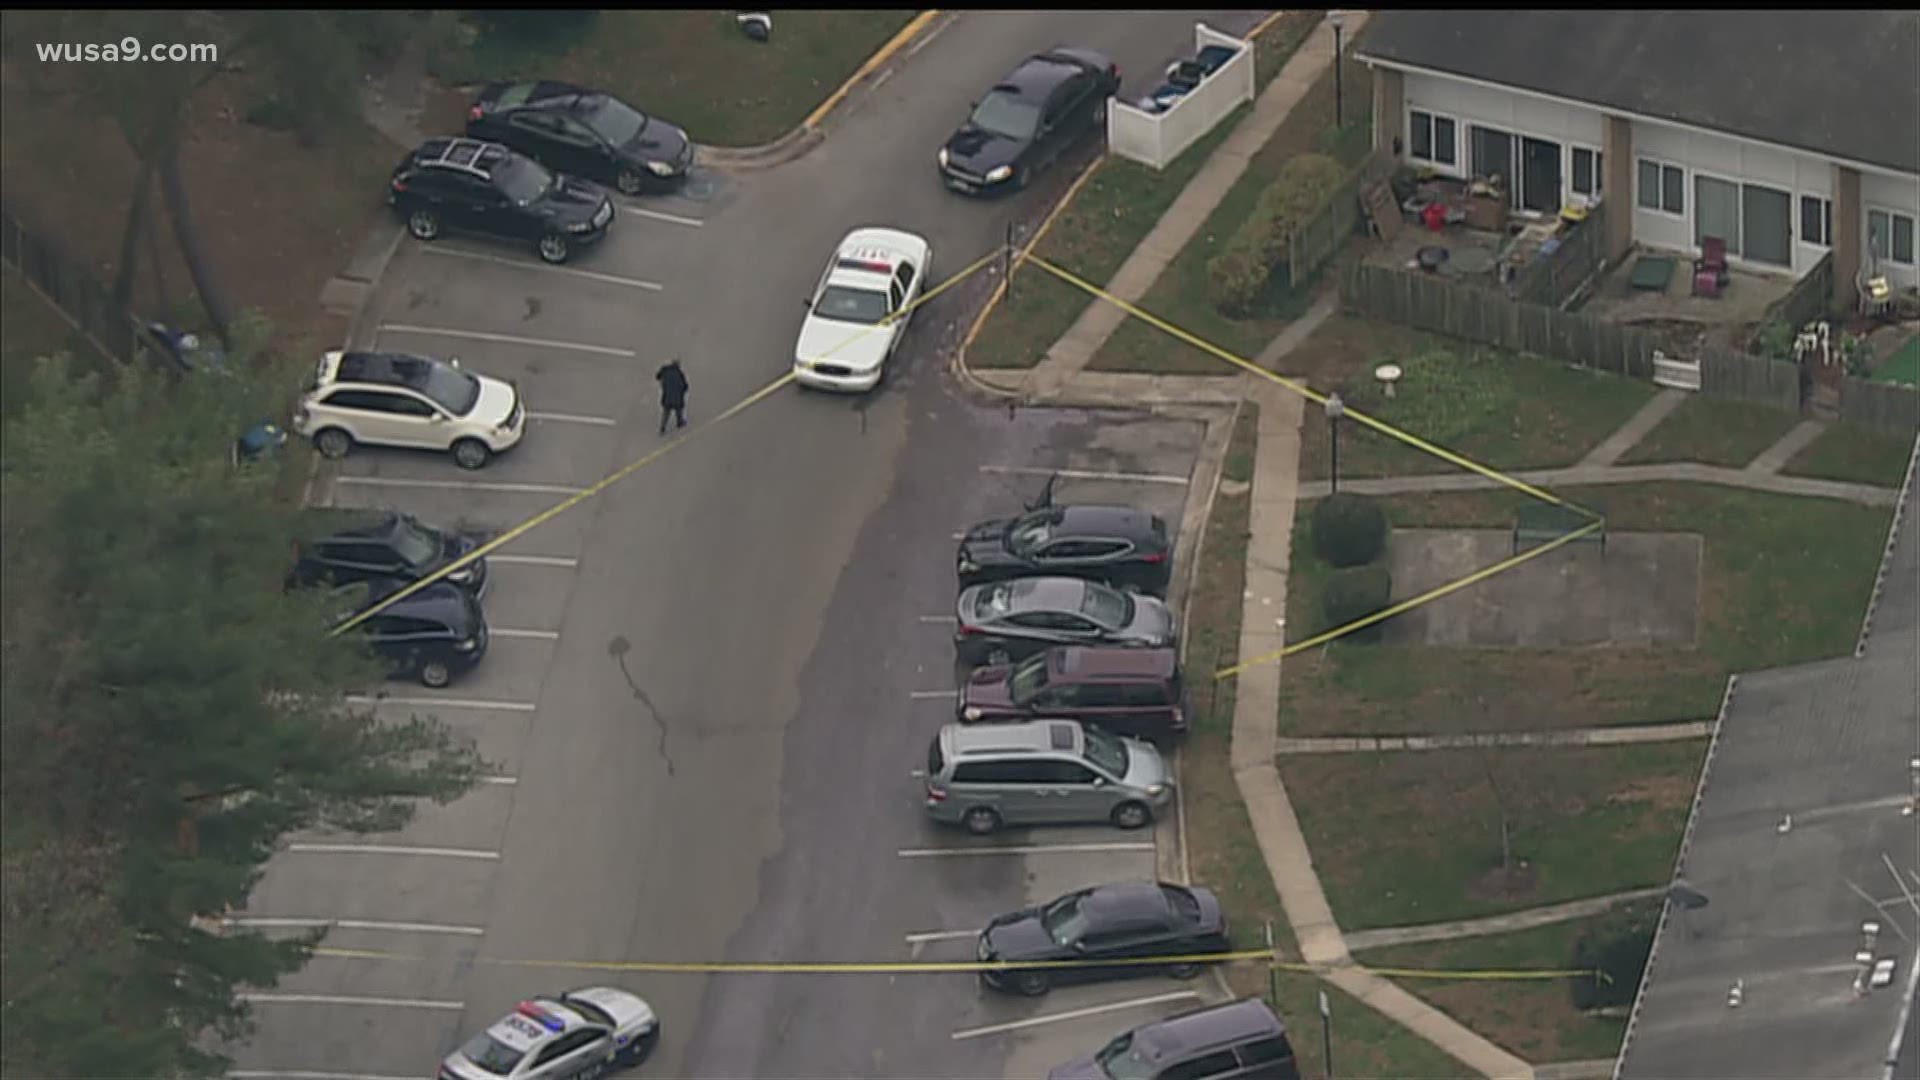 A woman was found shot multiple times in a car in Prince George's County Wednesday morning